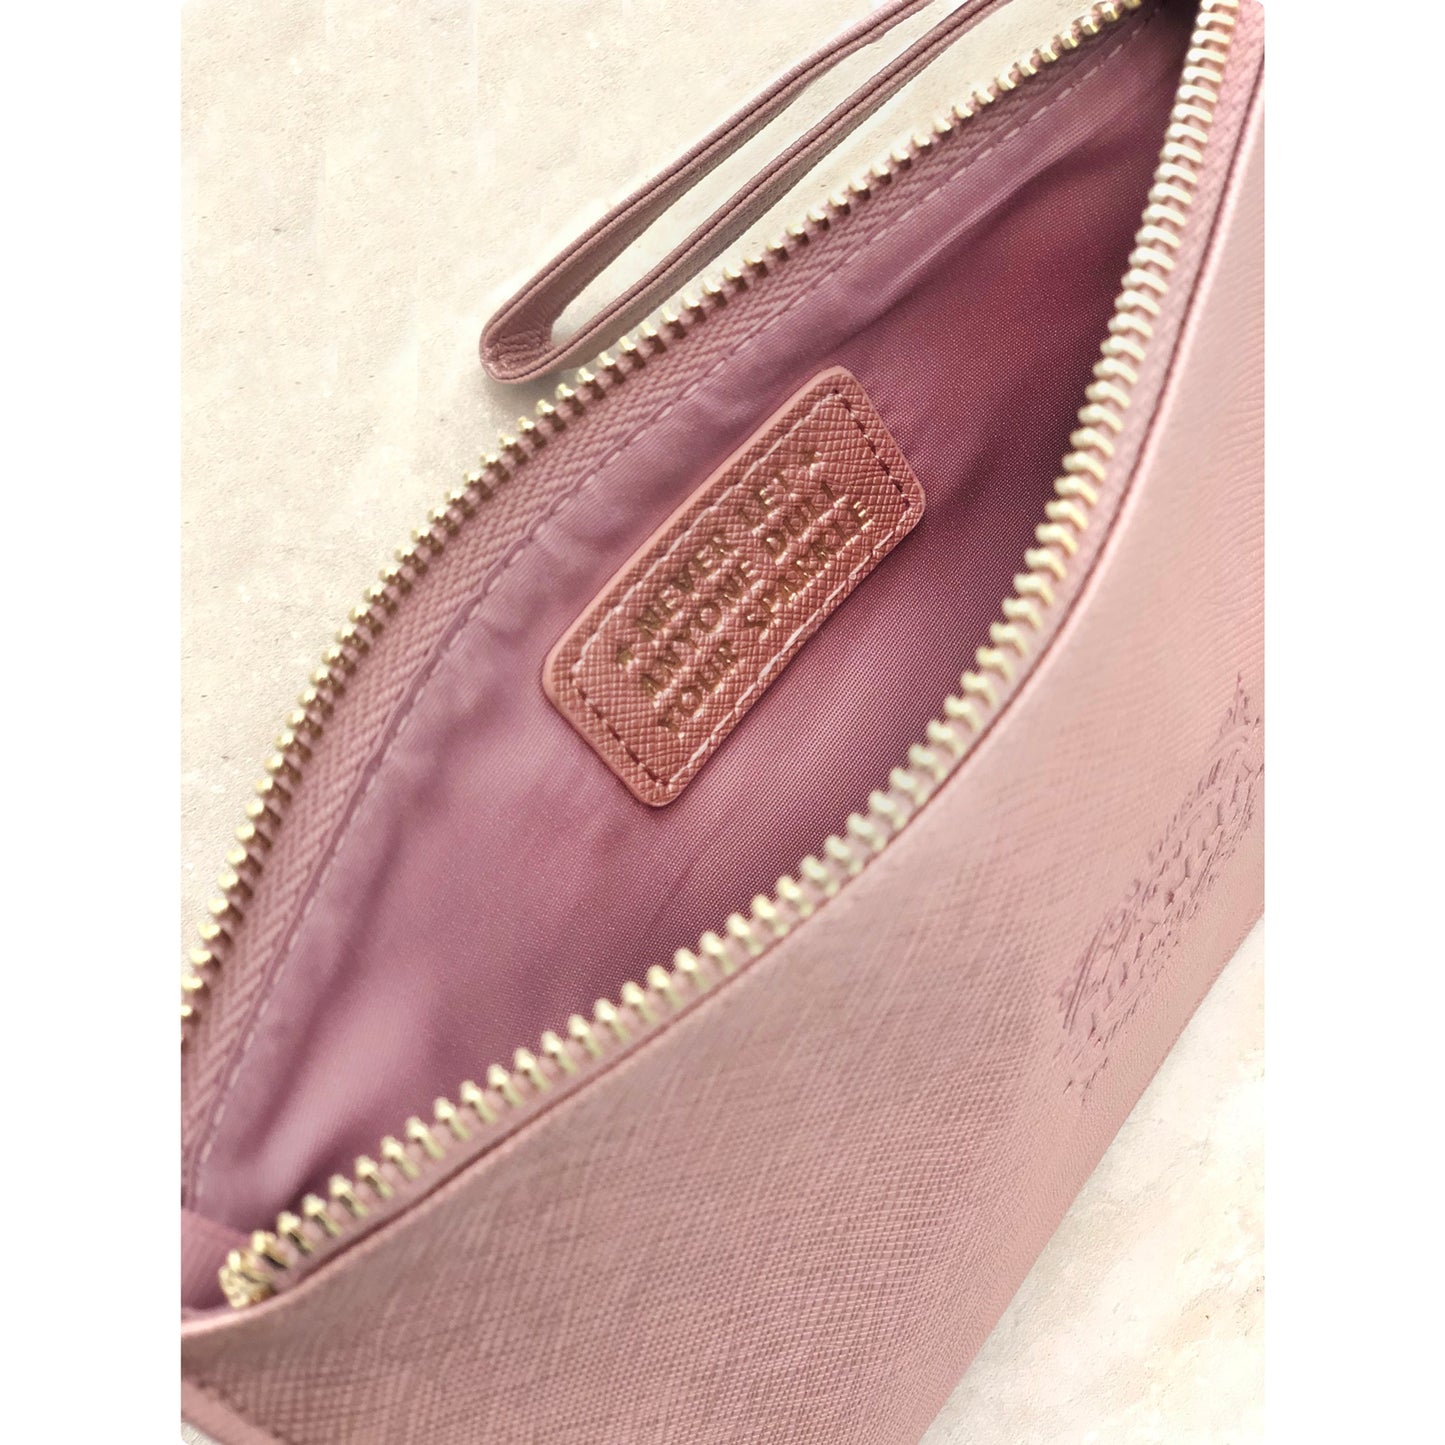 Clutch Bag With Handle & Embossed Text "Zoe"